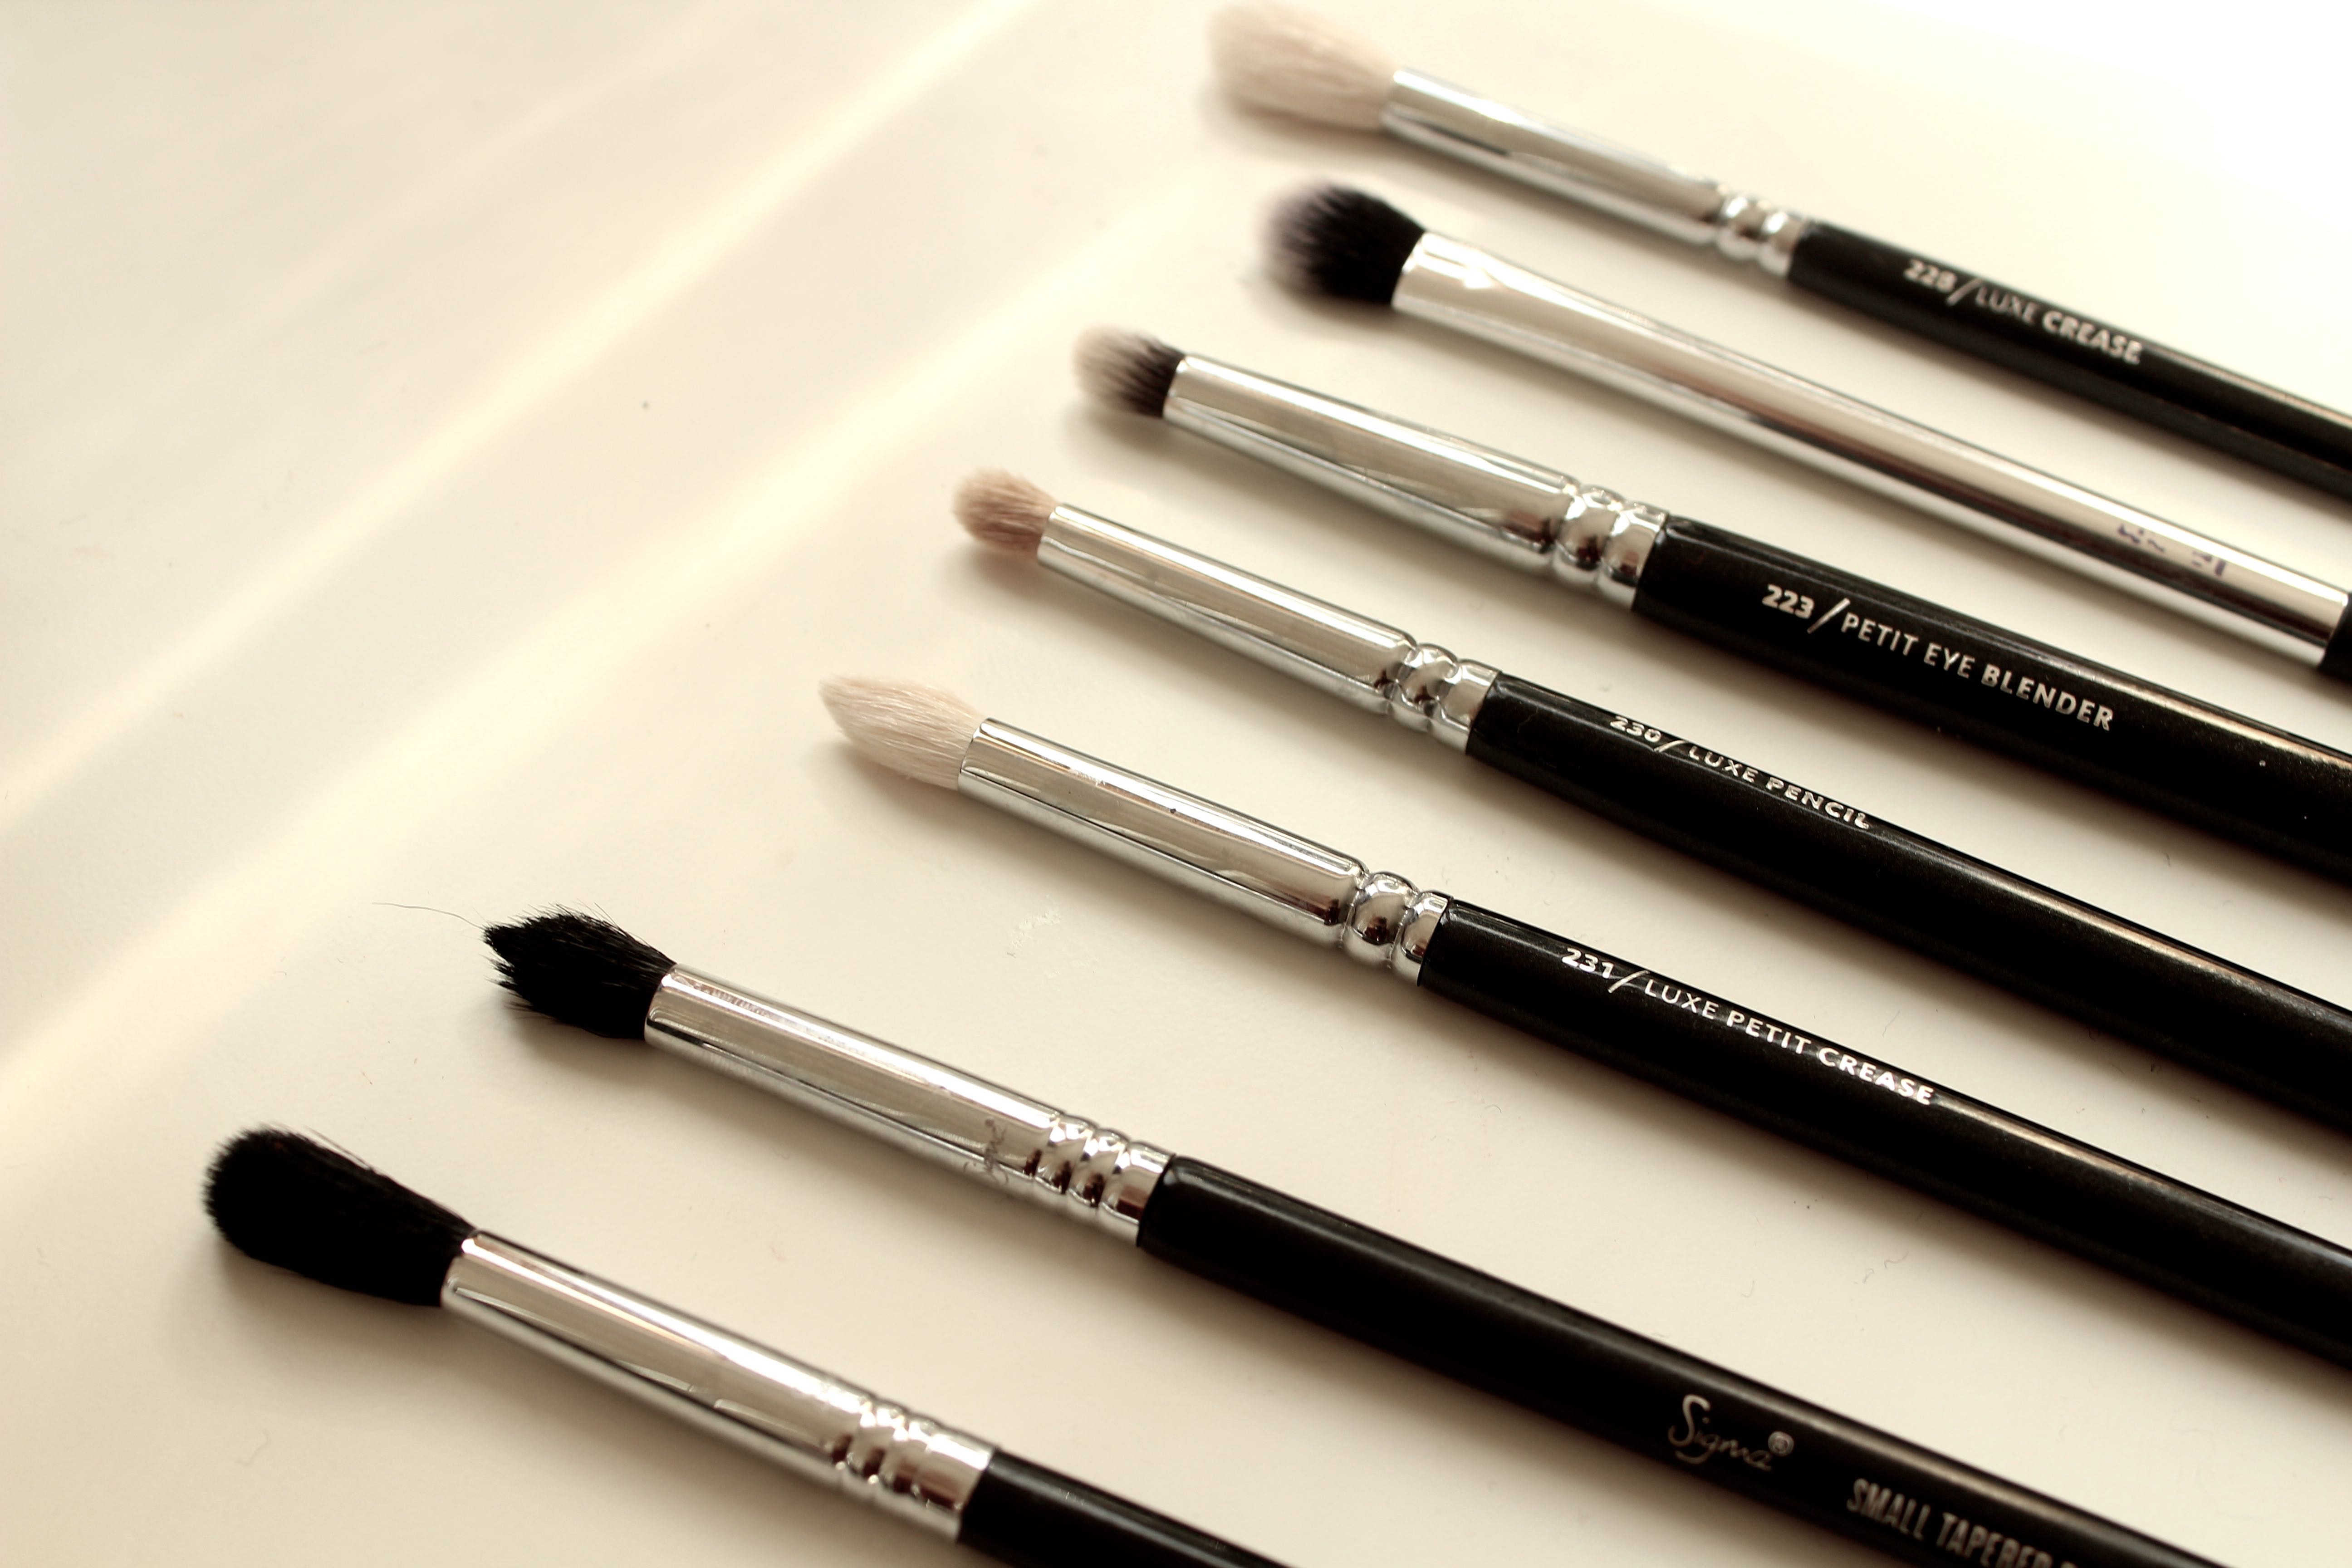 Eyeshadow Makeup For Asian Eyes The Best 7 Makeup Brushes For Smaller Eyes Great For South East